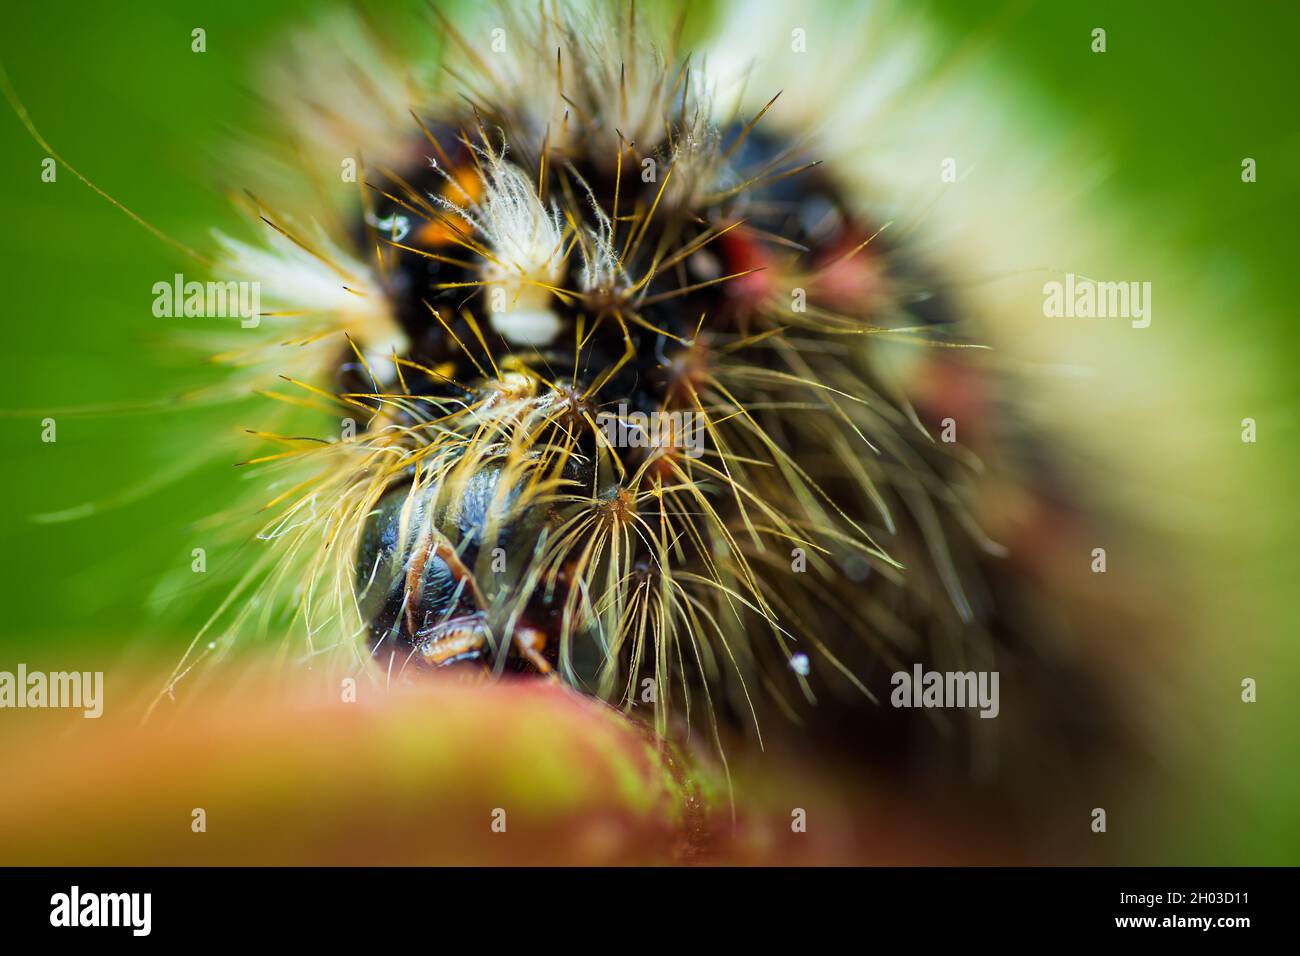 Grass moth, acronicta rumicis larvae, caterpillar climbing on stem with green background, front view. Macro animal Stock Photo